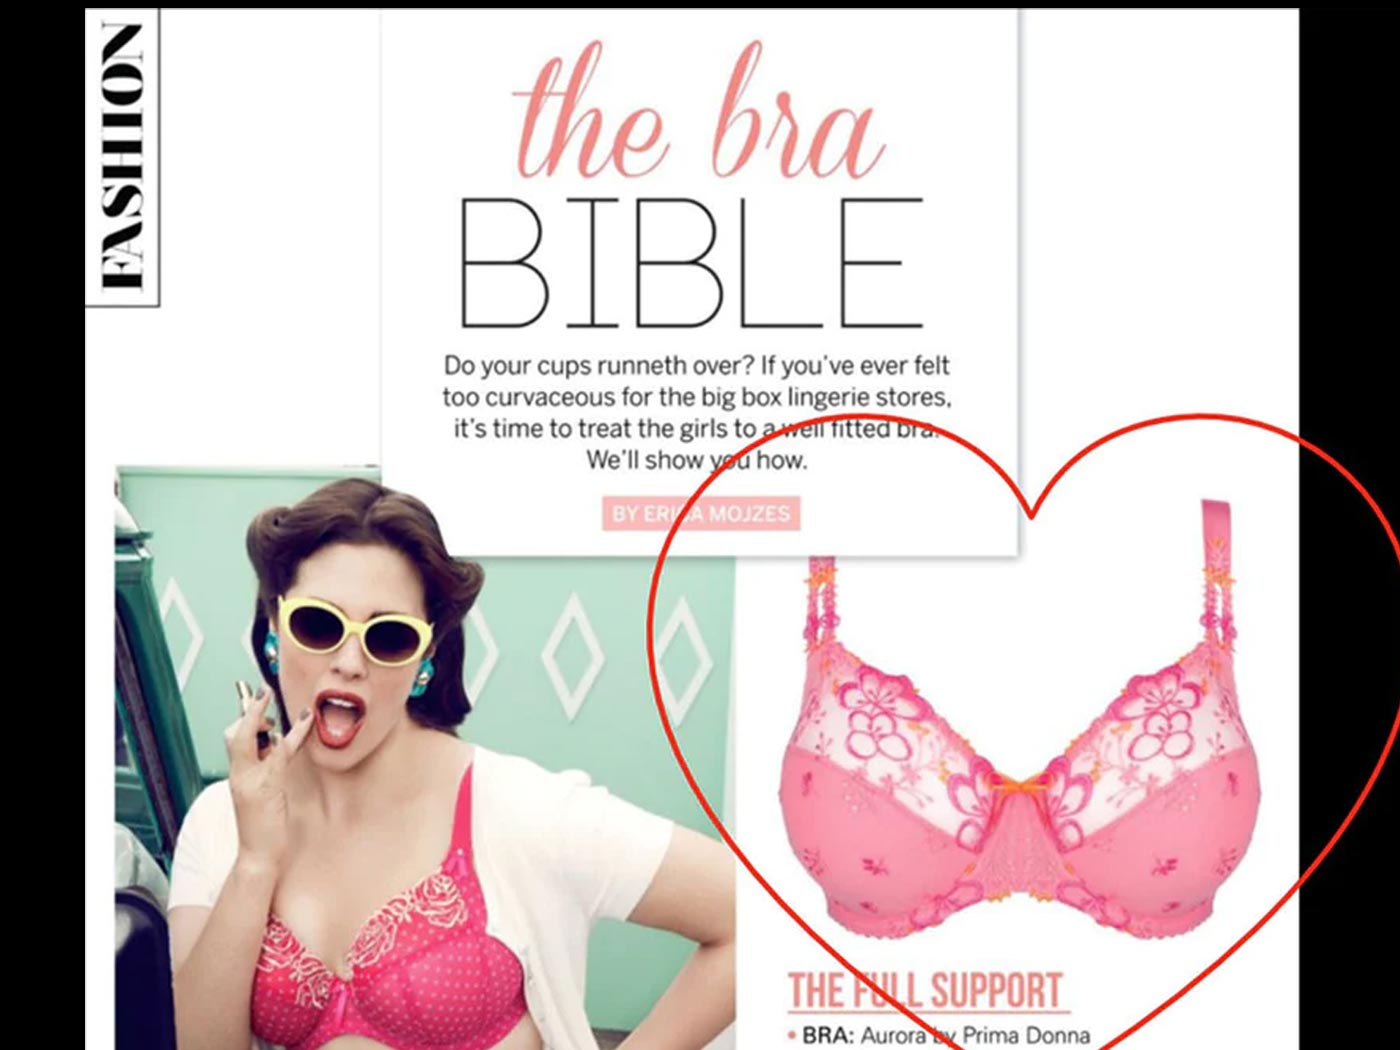 The Curvy Girl Guide: The Strapless Bra Post  Strapless bra, Girl fashion  style, Bra and panty sets